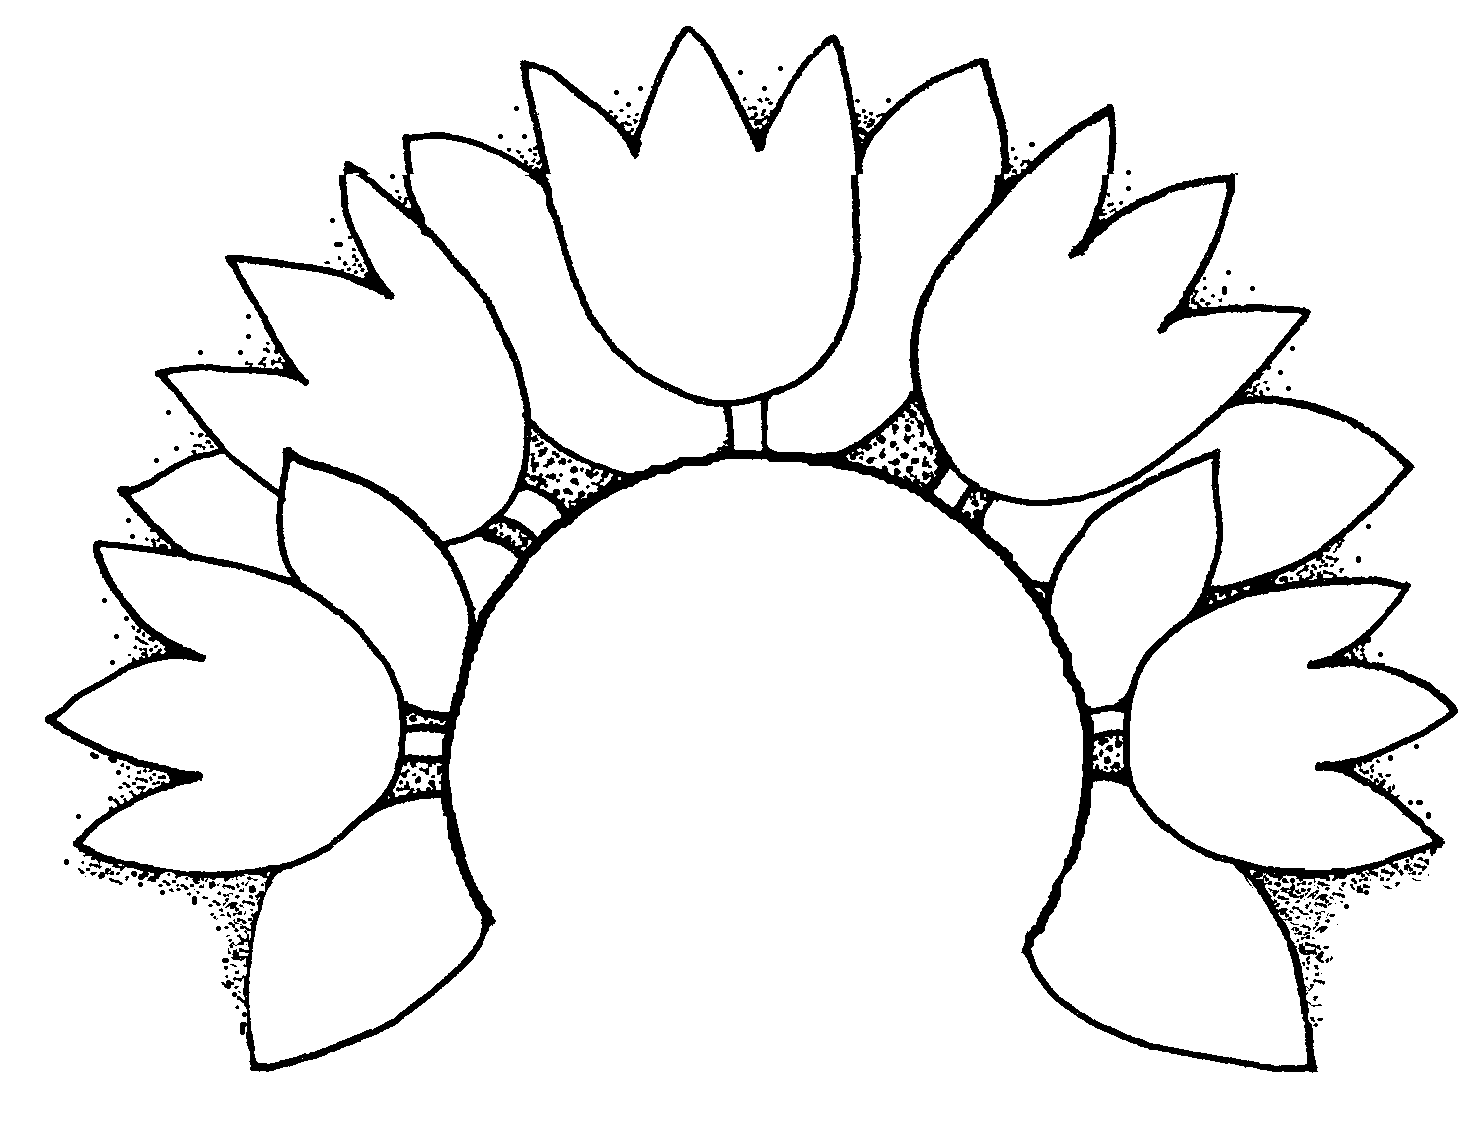 Flowers For > Sunflowers Clip Art Black And White